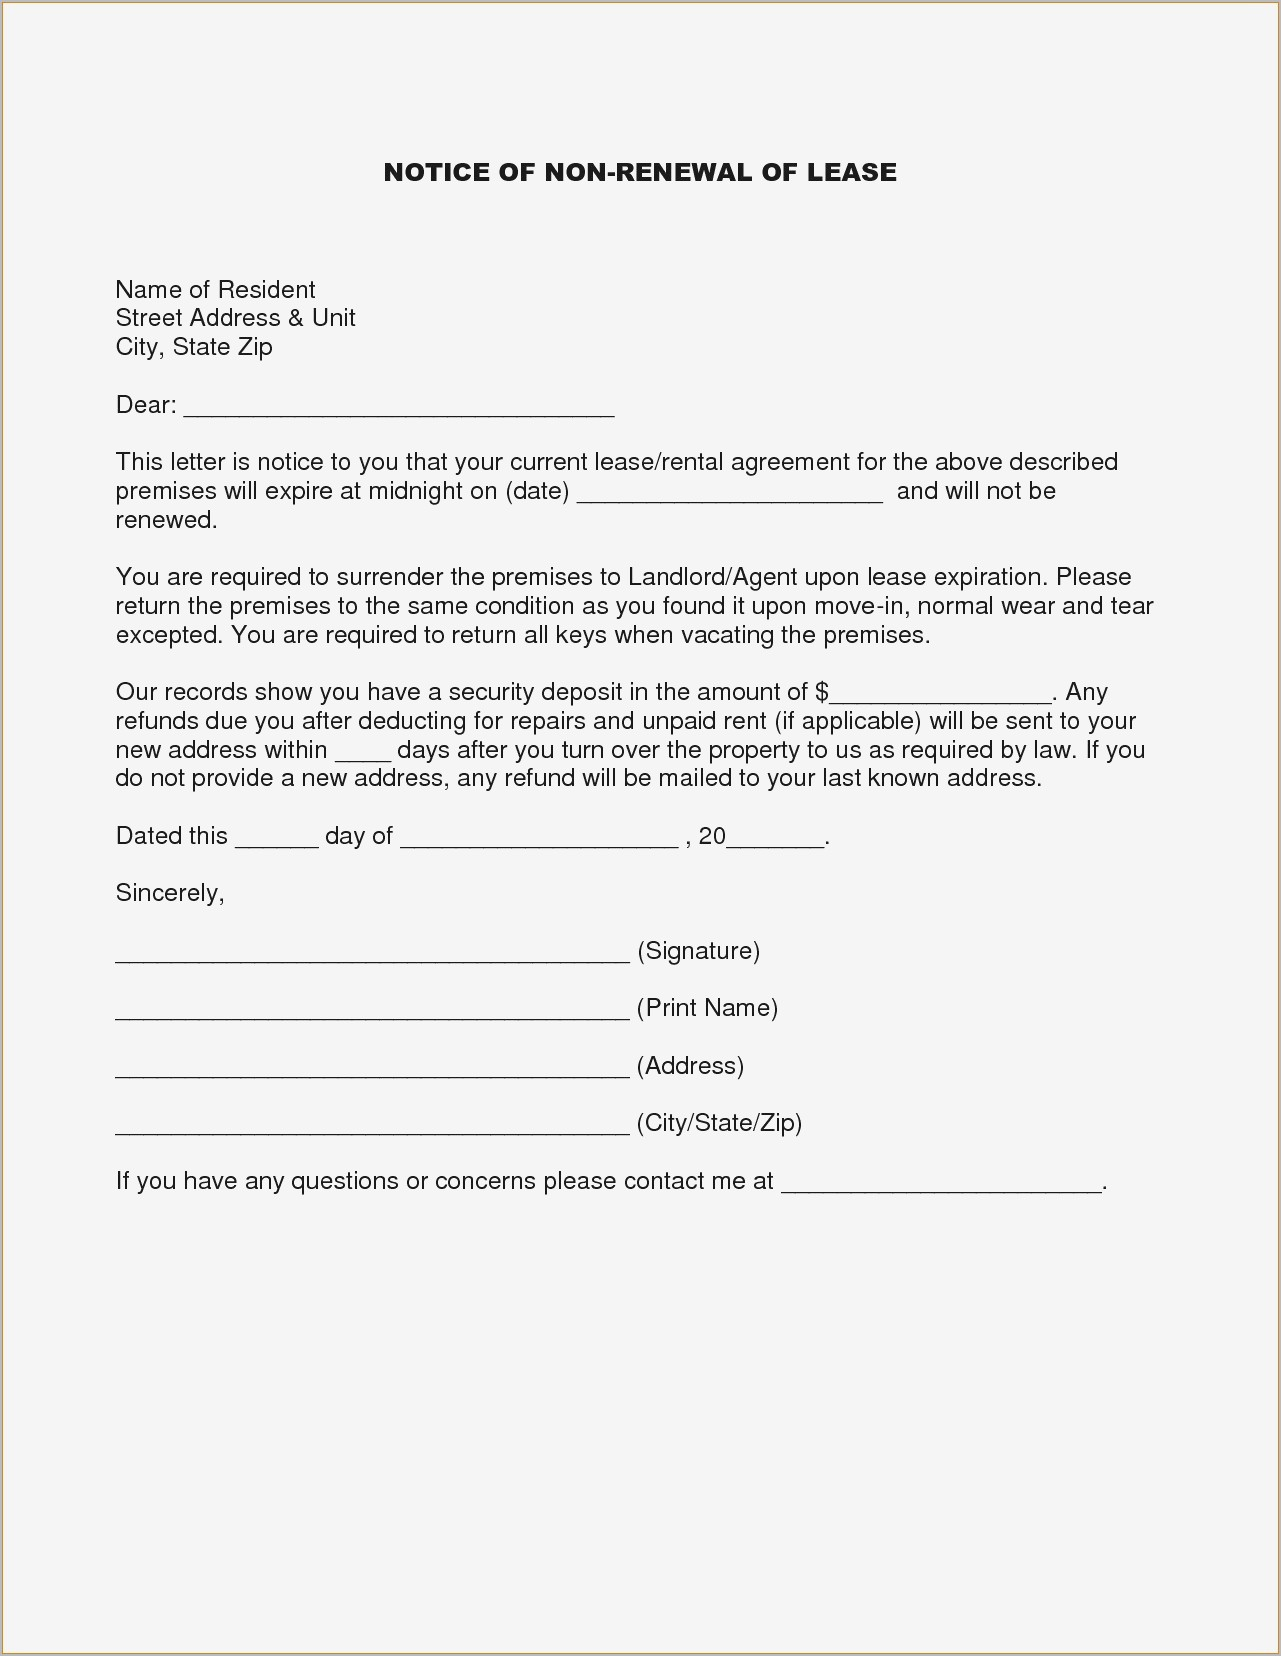 nonrenewal-of-lease-letter-template-samples-letter-template-collection